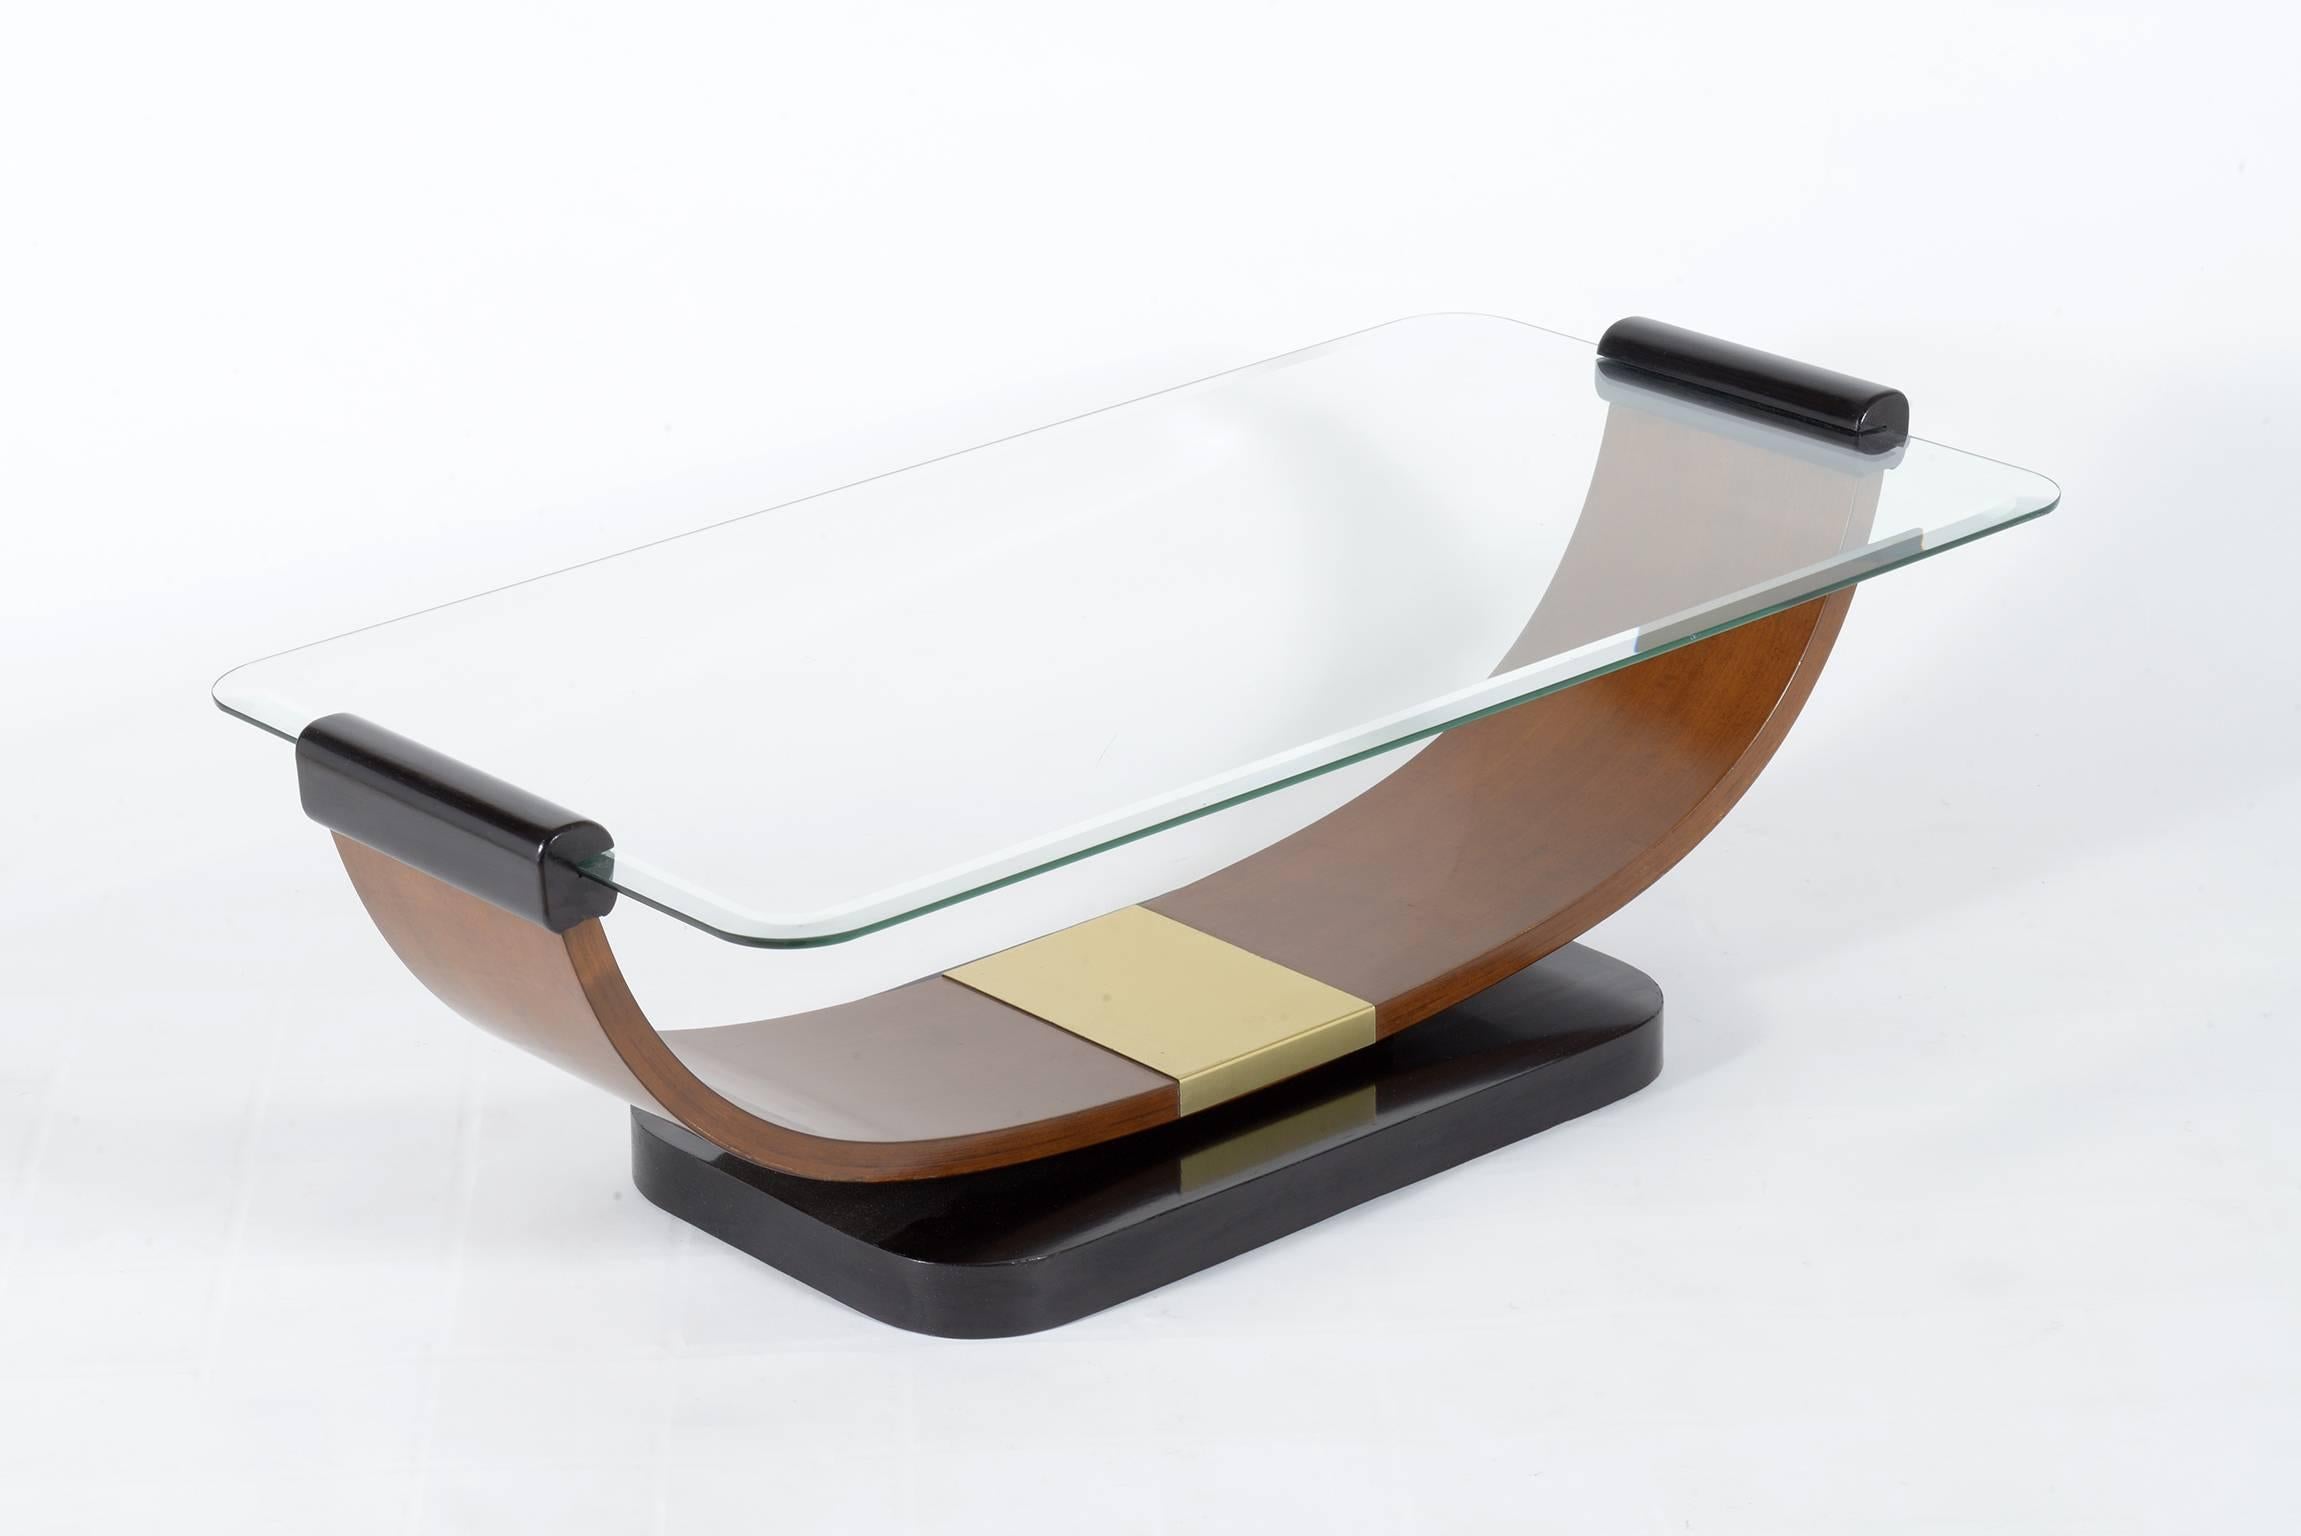 Coffee table with base in black wood with a wooden U on it which supports a thick rectangular glass top with rounded corners and a profoundly ground edge. Brass details on the centre of the wood U.